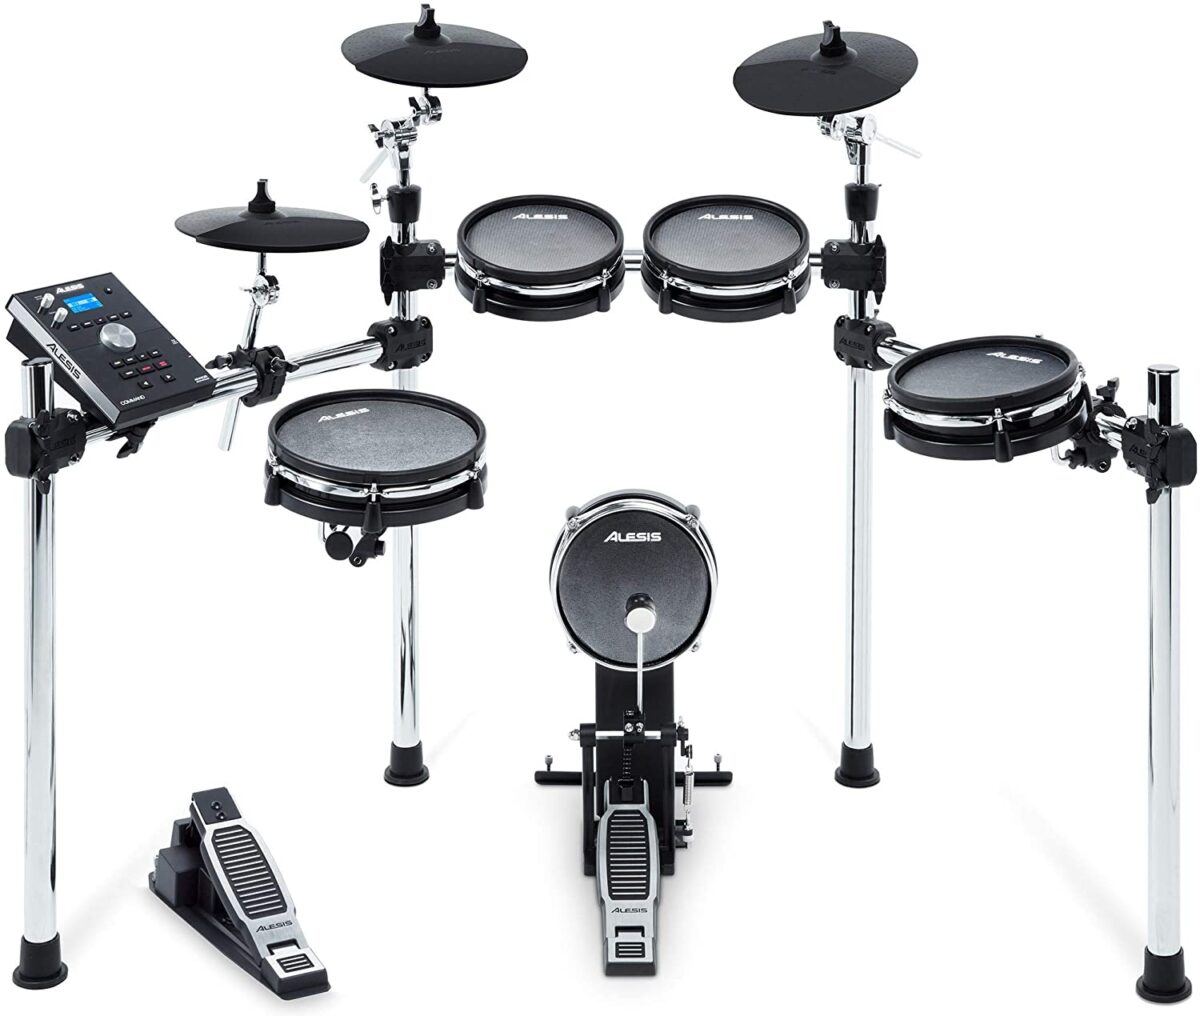 Need Affordable Electronic Drums? Here Are the Best Electronic Drums Under 1000